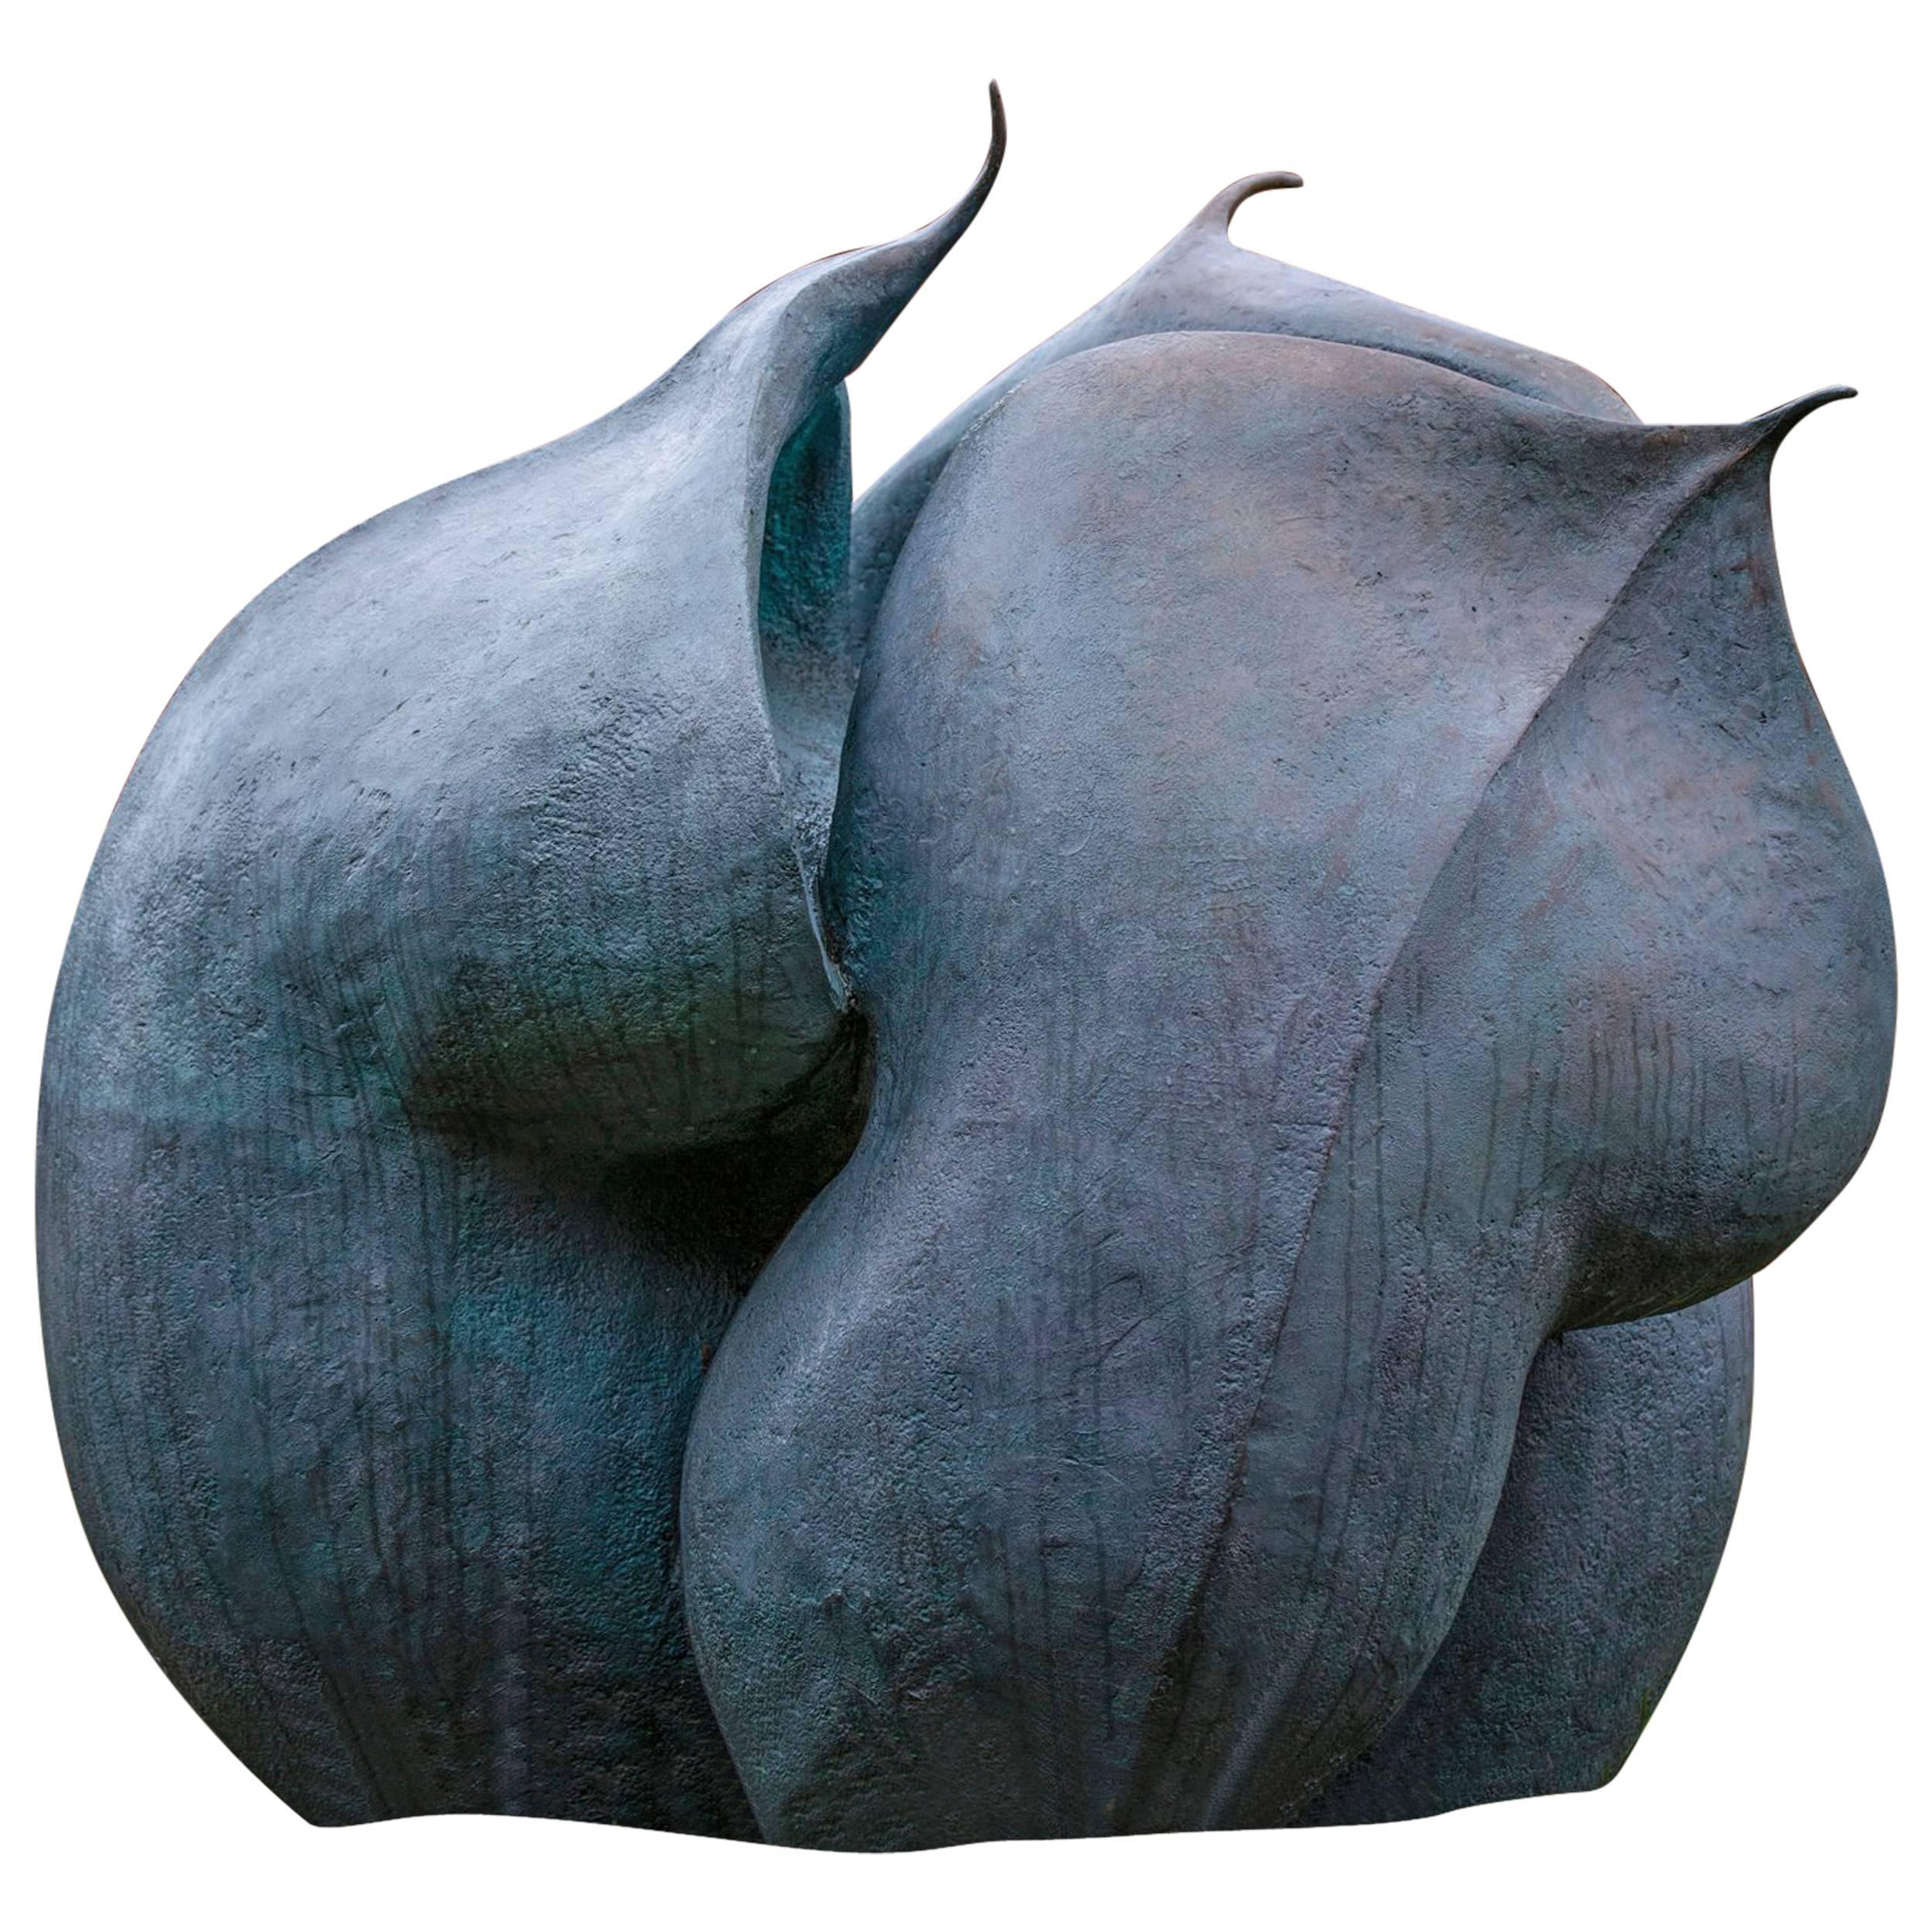 Helleborus Niger Seed Pod 'Artist Cast Now Featuring in Royal Enclosure, Ascot' For Sale